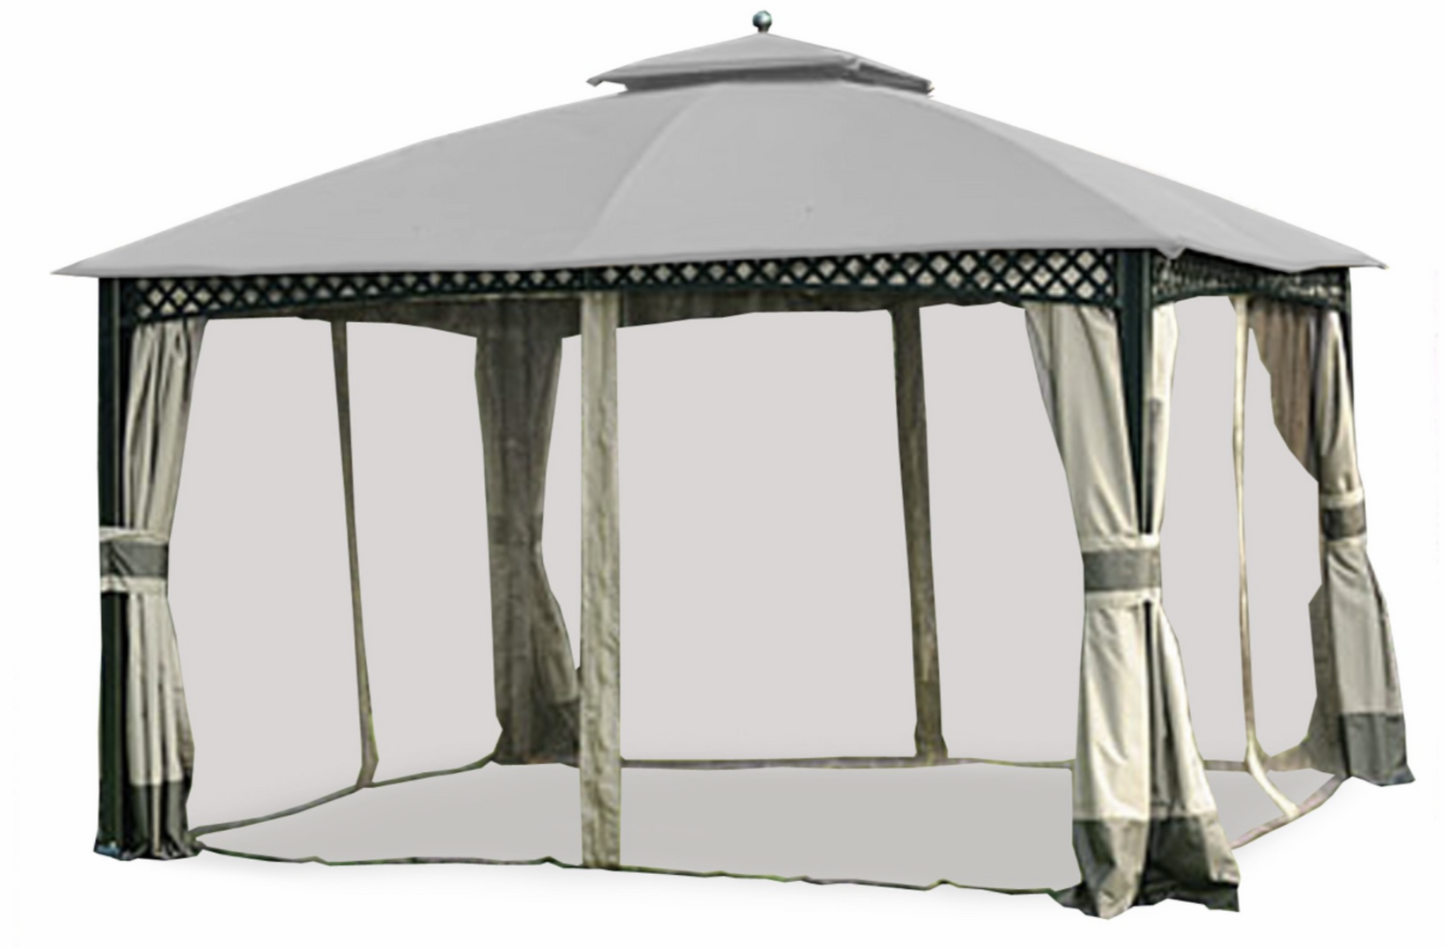 Original Replacement L-GZ842PST-D 10x12 Canopy Curtain and Mosquito netting Bundle for Sold at Big Lots Beige